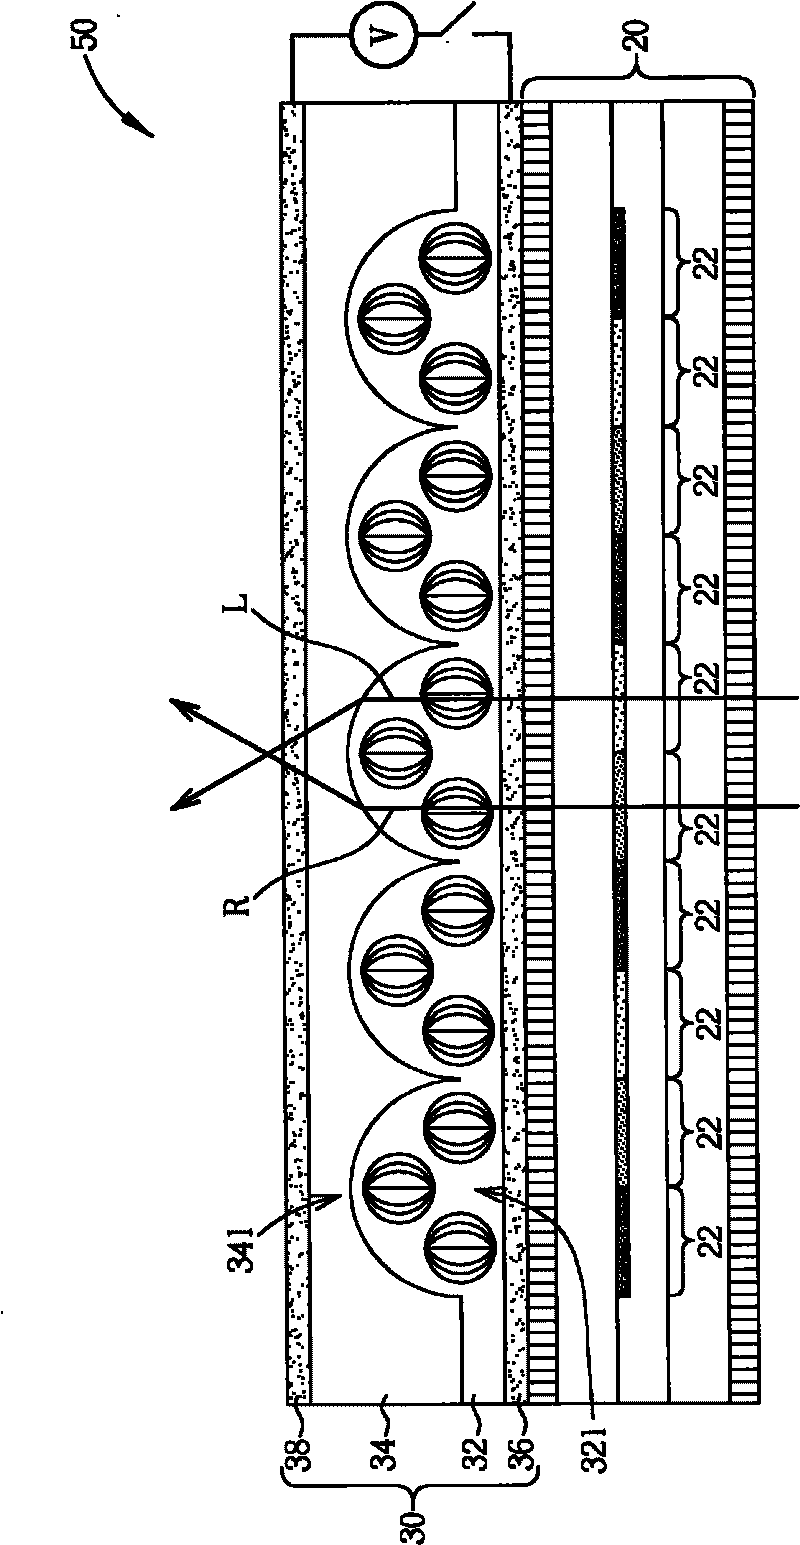 Display device capable of being switched into two-dimensional and three-dimensional display modes and active scattering lens thereof